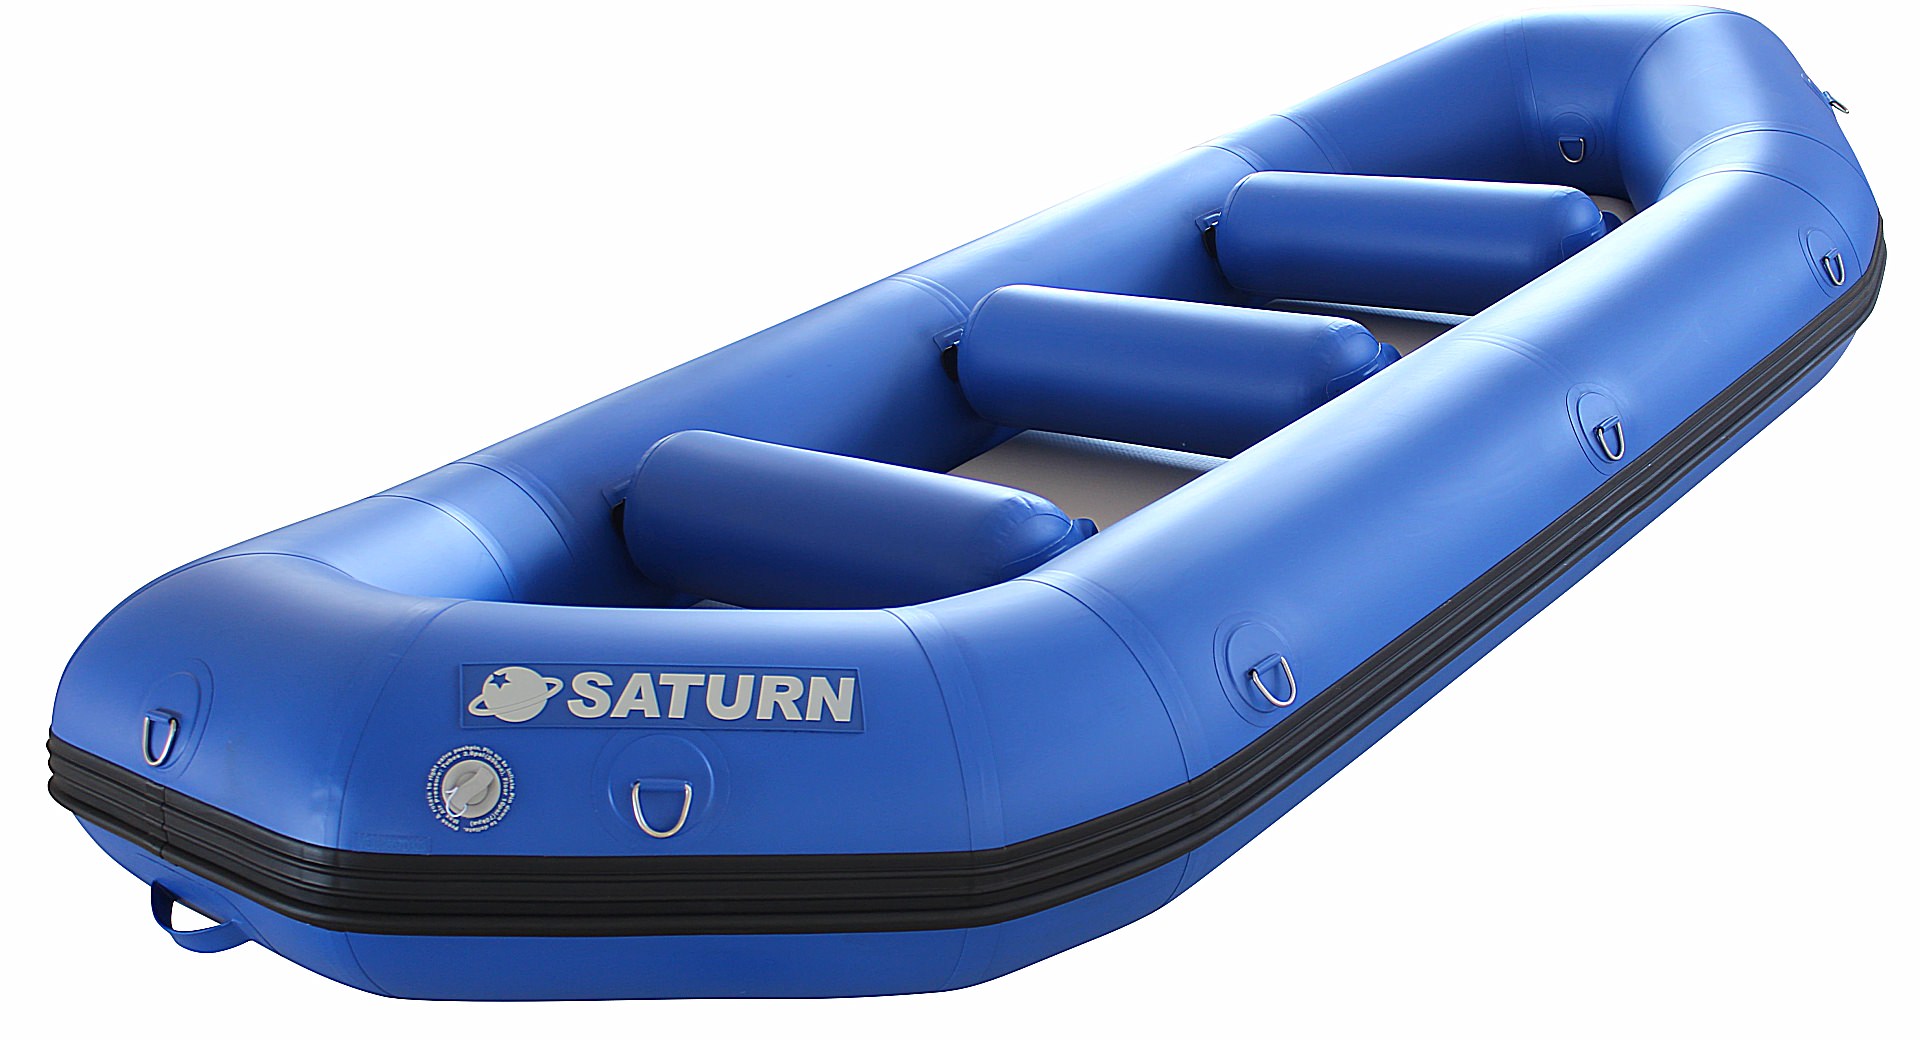 13' Saturn White Water River Raft for whitewater rafting.